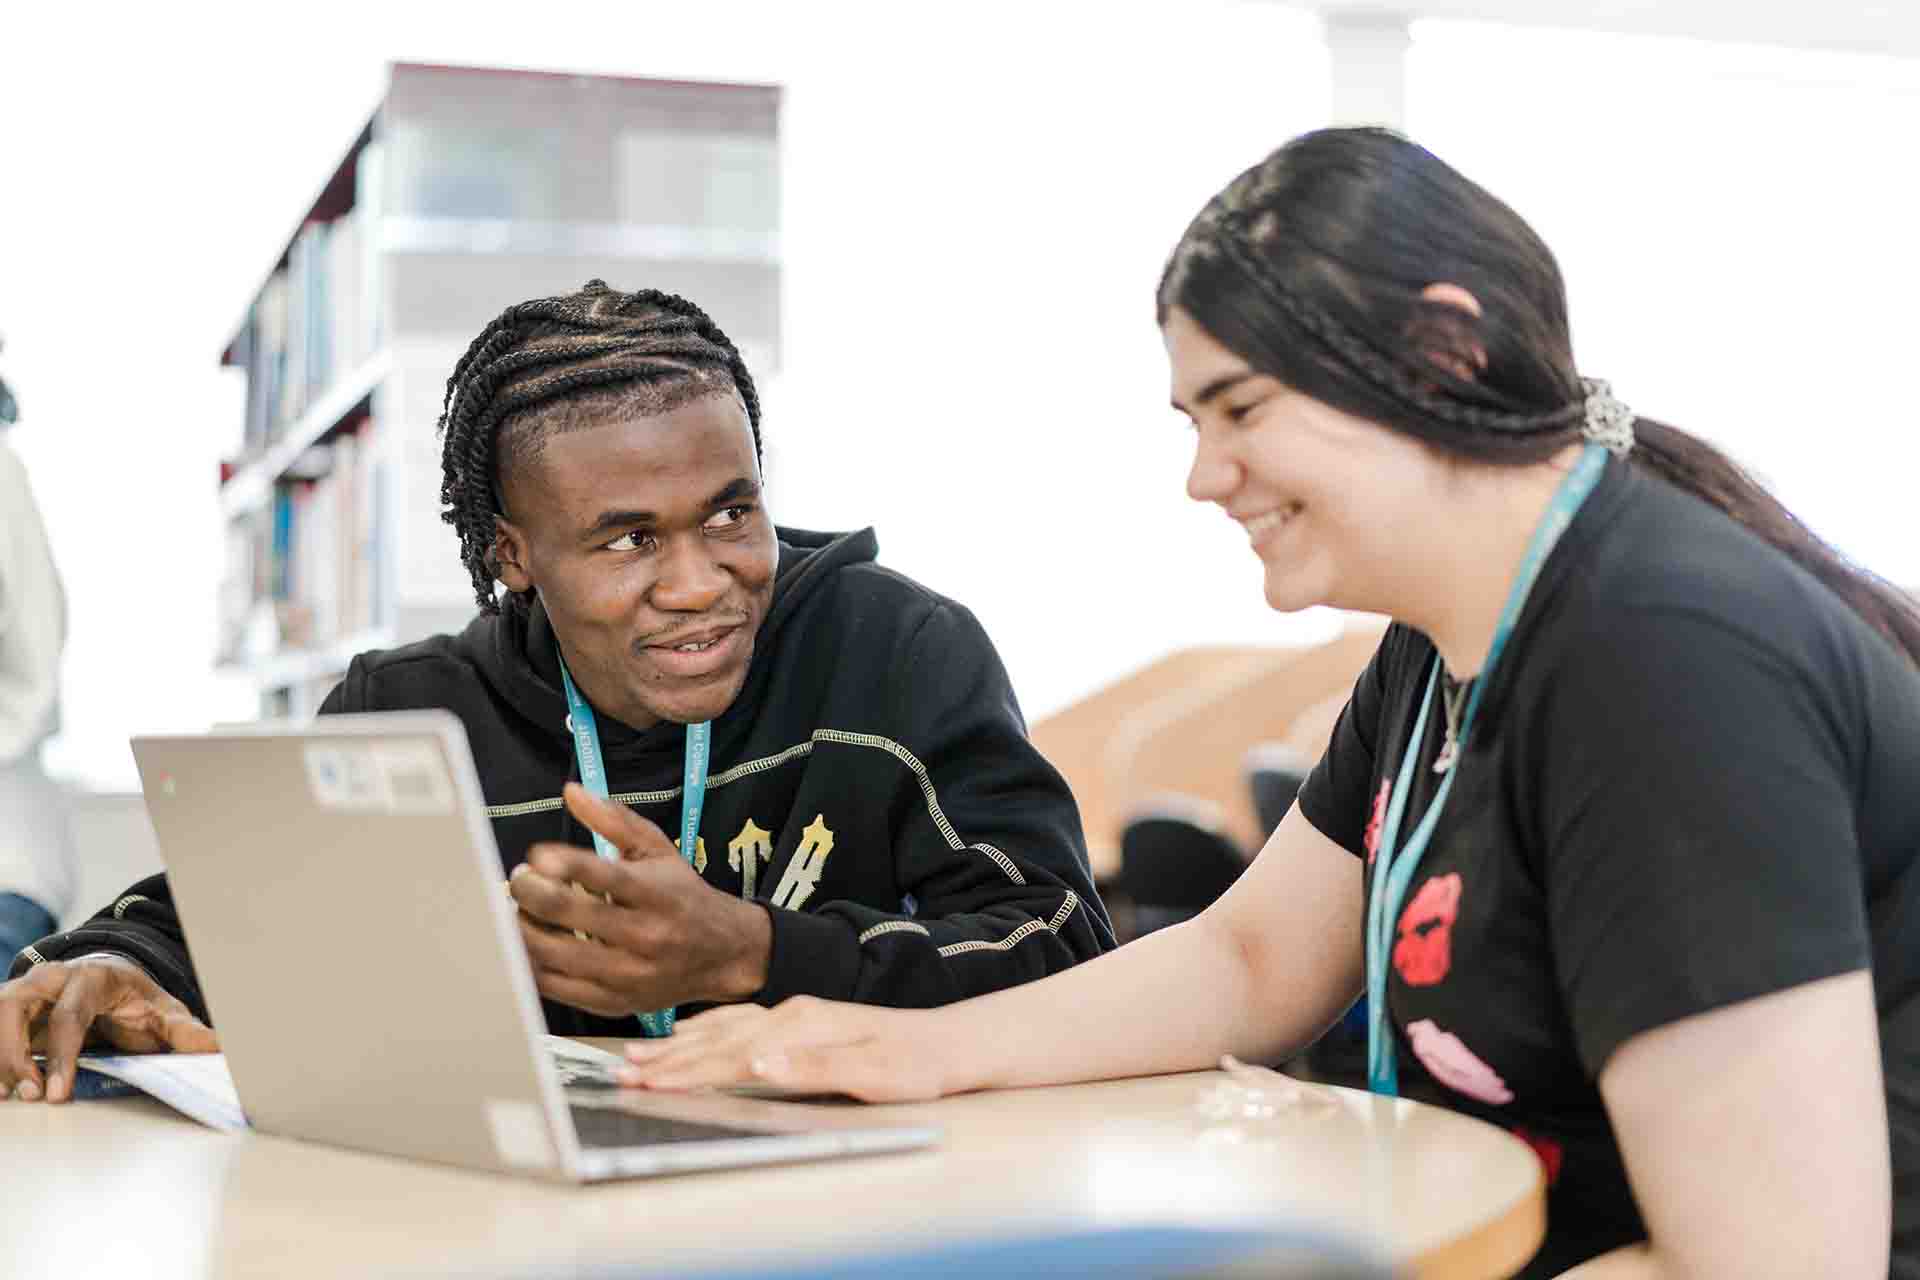 A male student and a female student both in black top wearing Harrogate College lanyard, sitting in front of a laptop having discussion